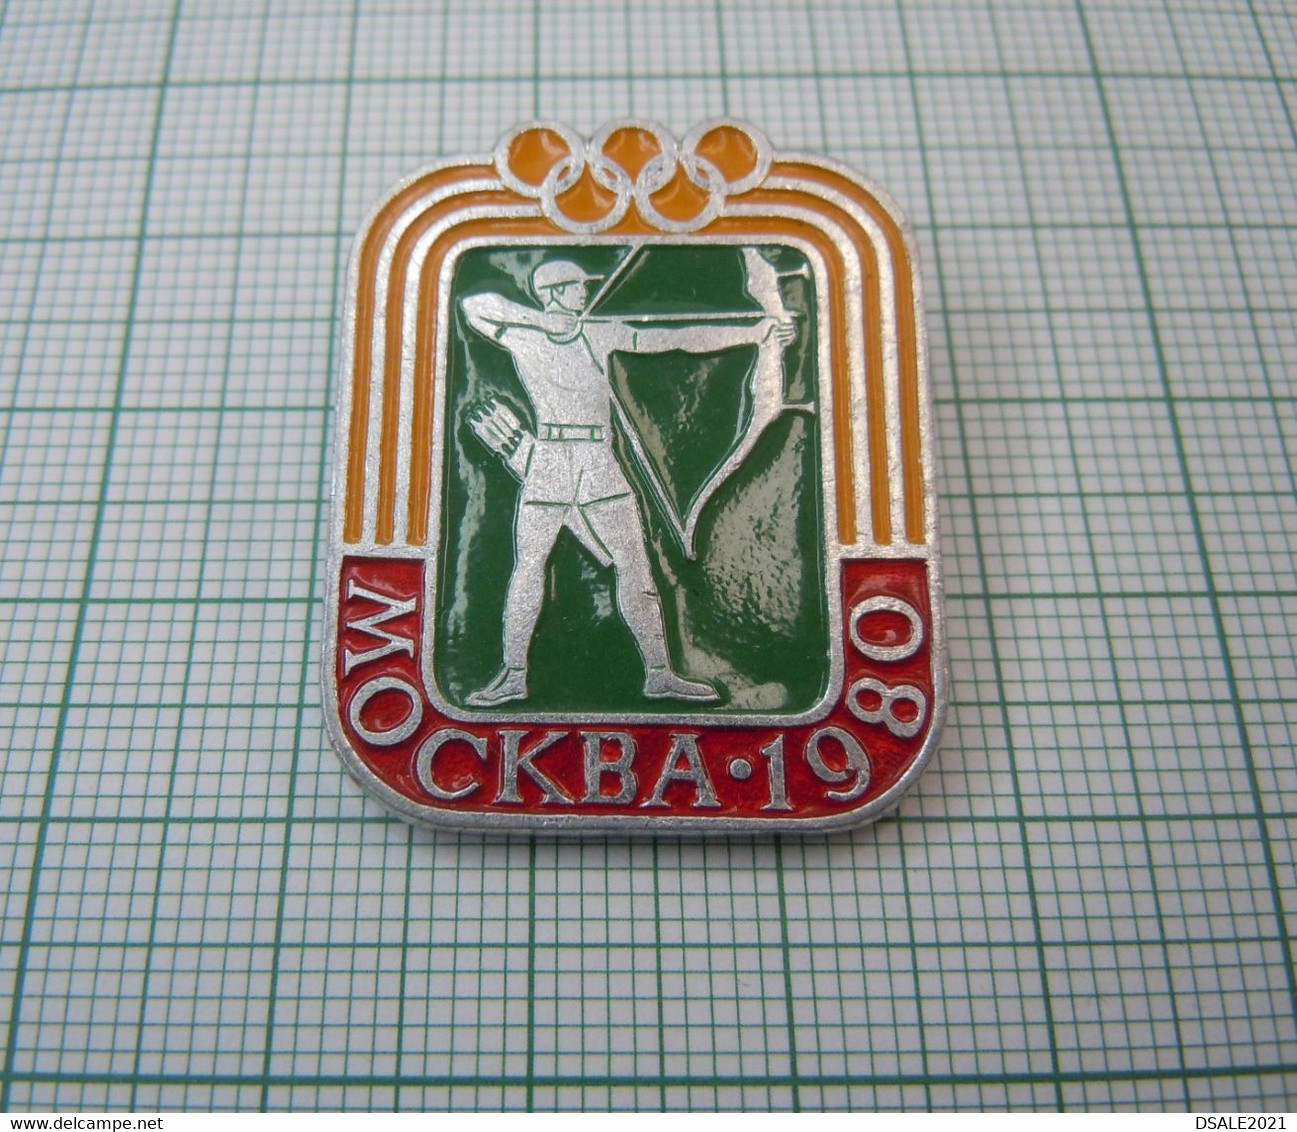 Russia USSR Russland Sowjetunion Moscow 1980 Summer Olympic Archery Sport Mascot Vintage Pin Badge (m985) - Tiro Al Arco